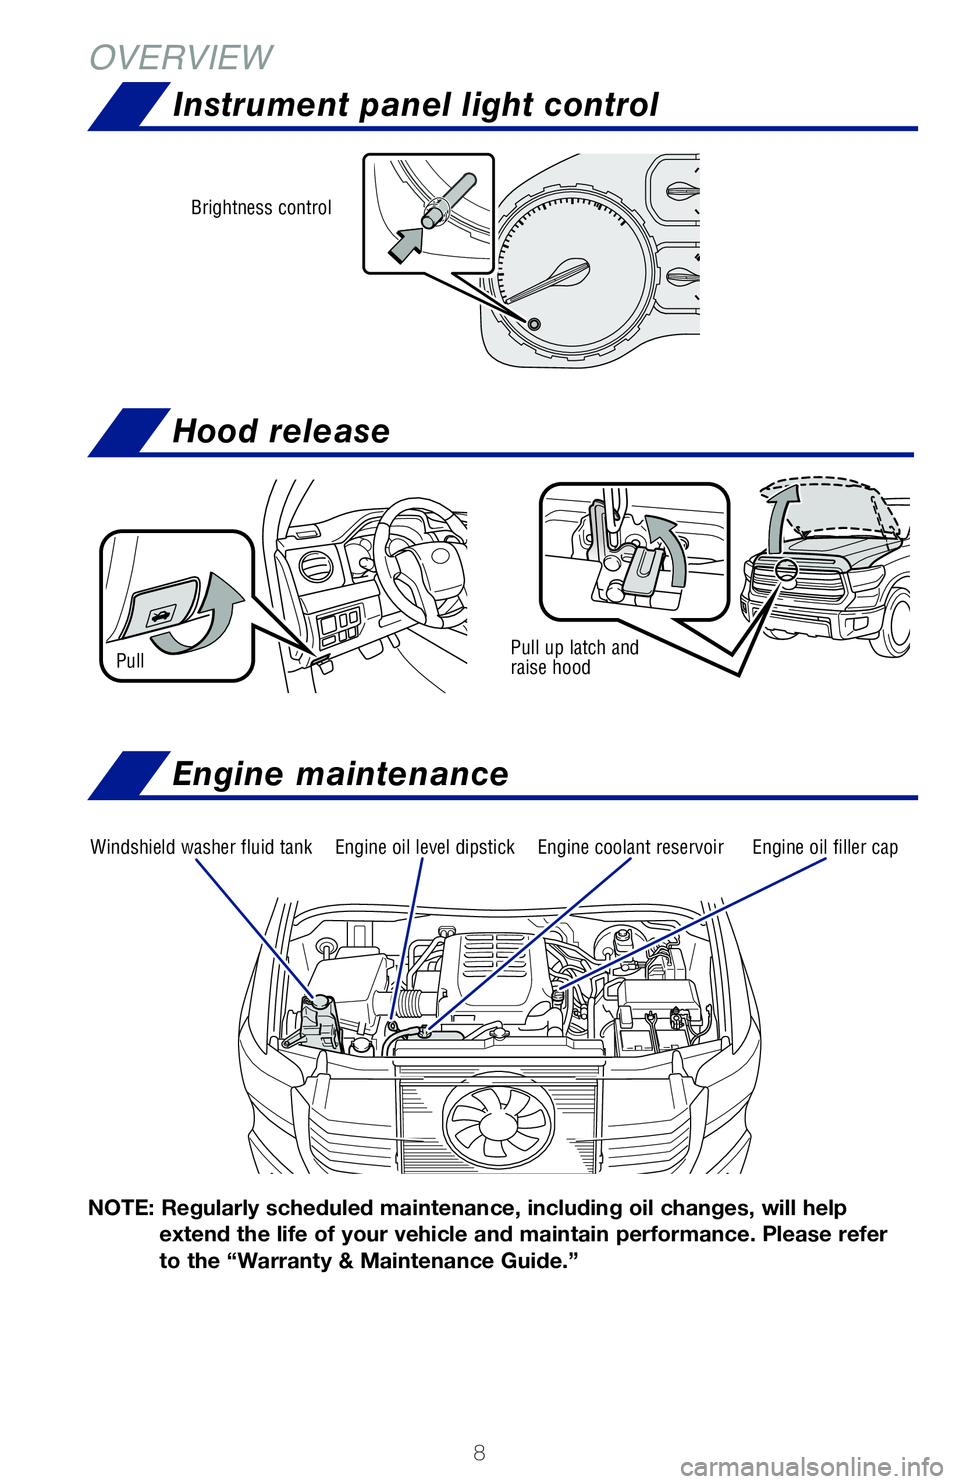 TOYOTA TUNDRA 2020  Owners Manual (in English) 8
OVERVIEW
Hood release
Pull up latch and  raise hoodPull
Windshield washer fluid tankEngine coolant reservoirEngine oil filler capEngine oil level dipstick
NOTE: Regularly scheduled maintenance, incl